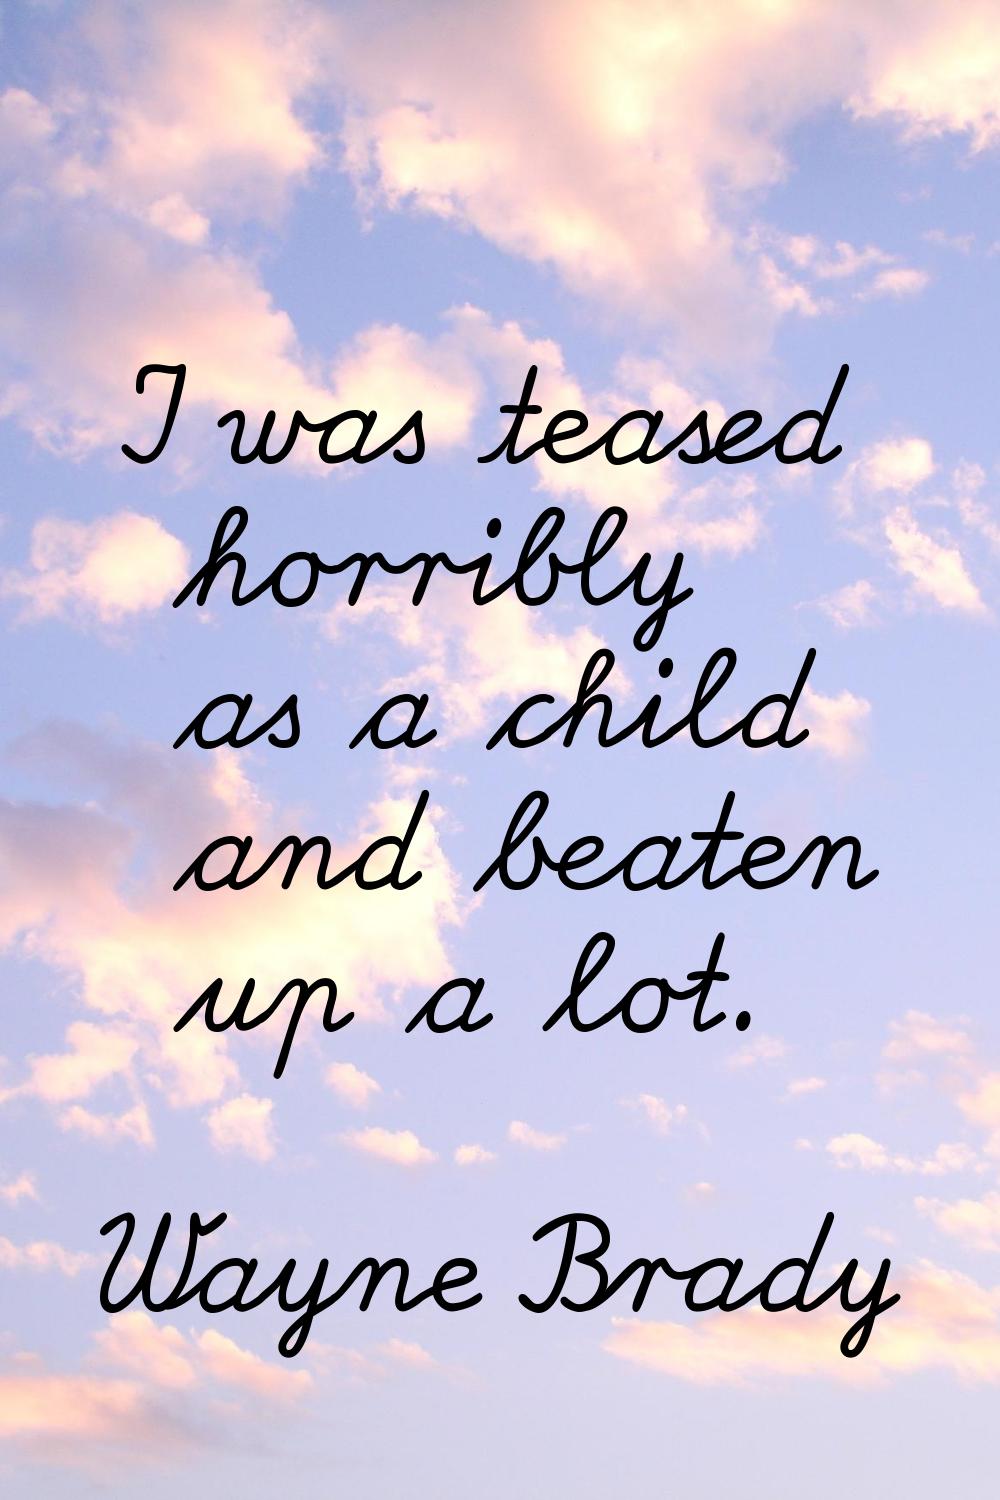 I was teased horribly as a child and beaten up a lot.